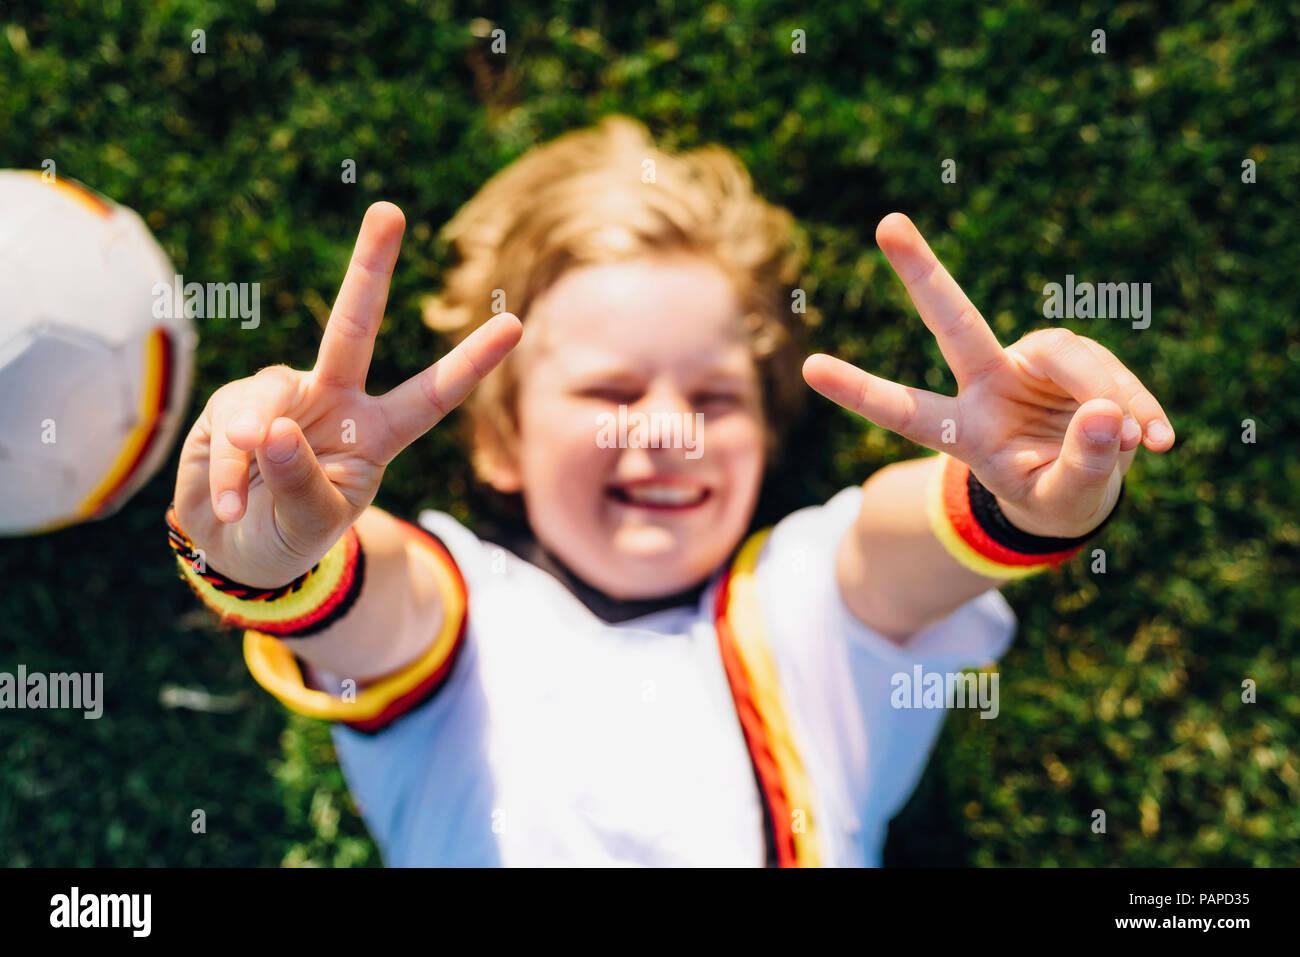 Boy in German soccer shirt lying on grass, making victory sign Stock Photo